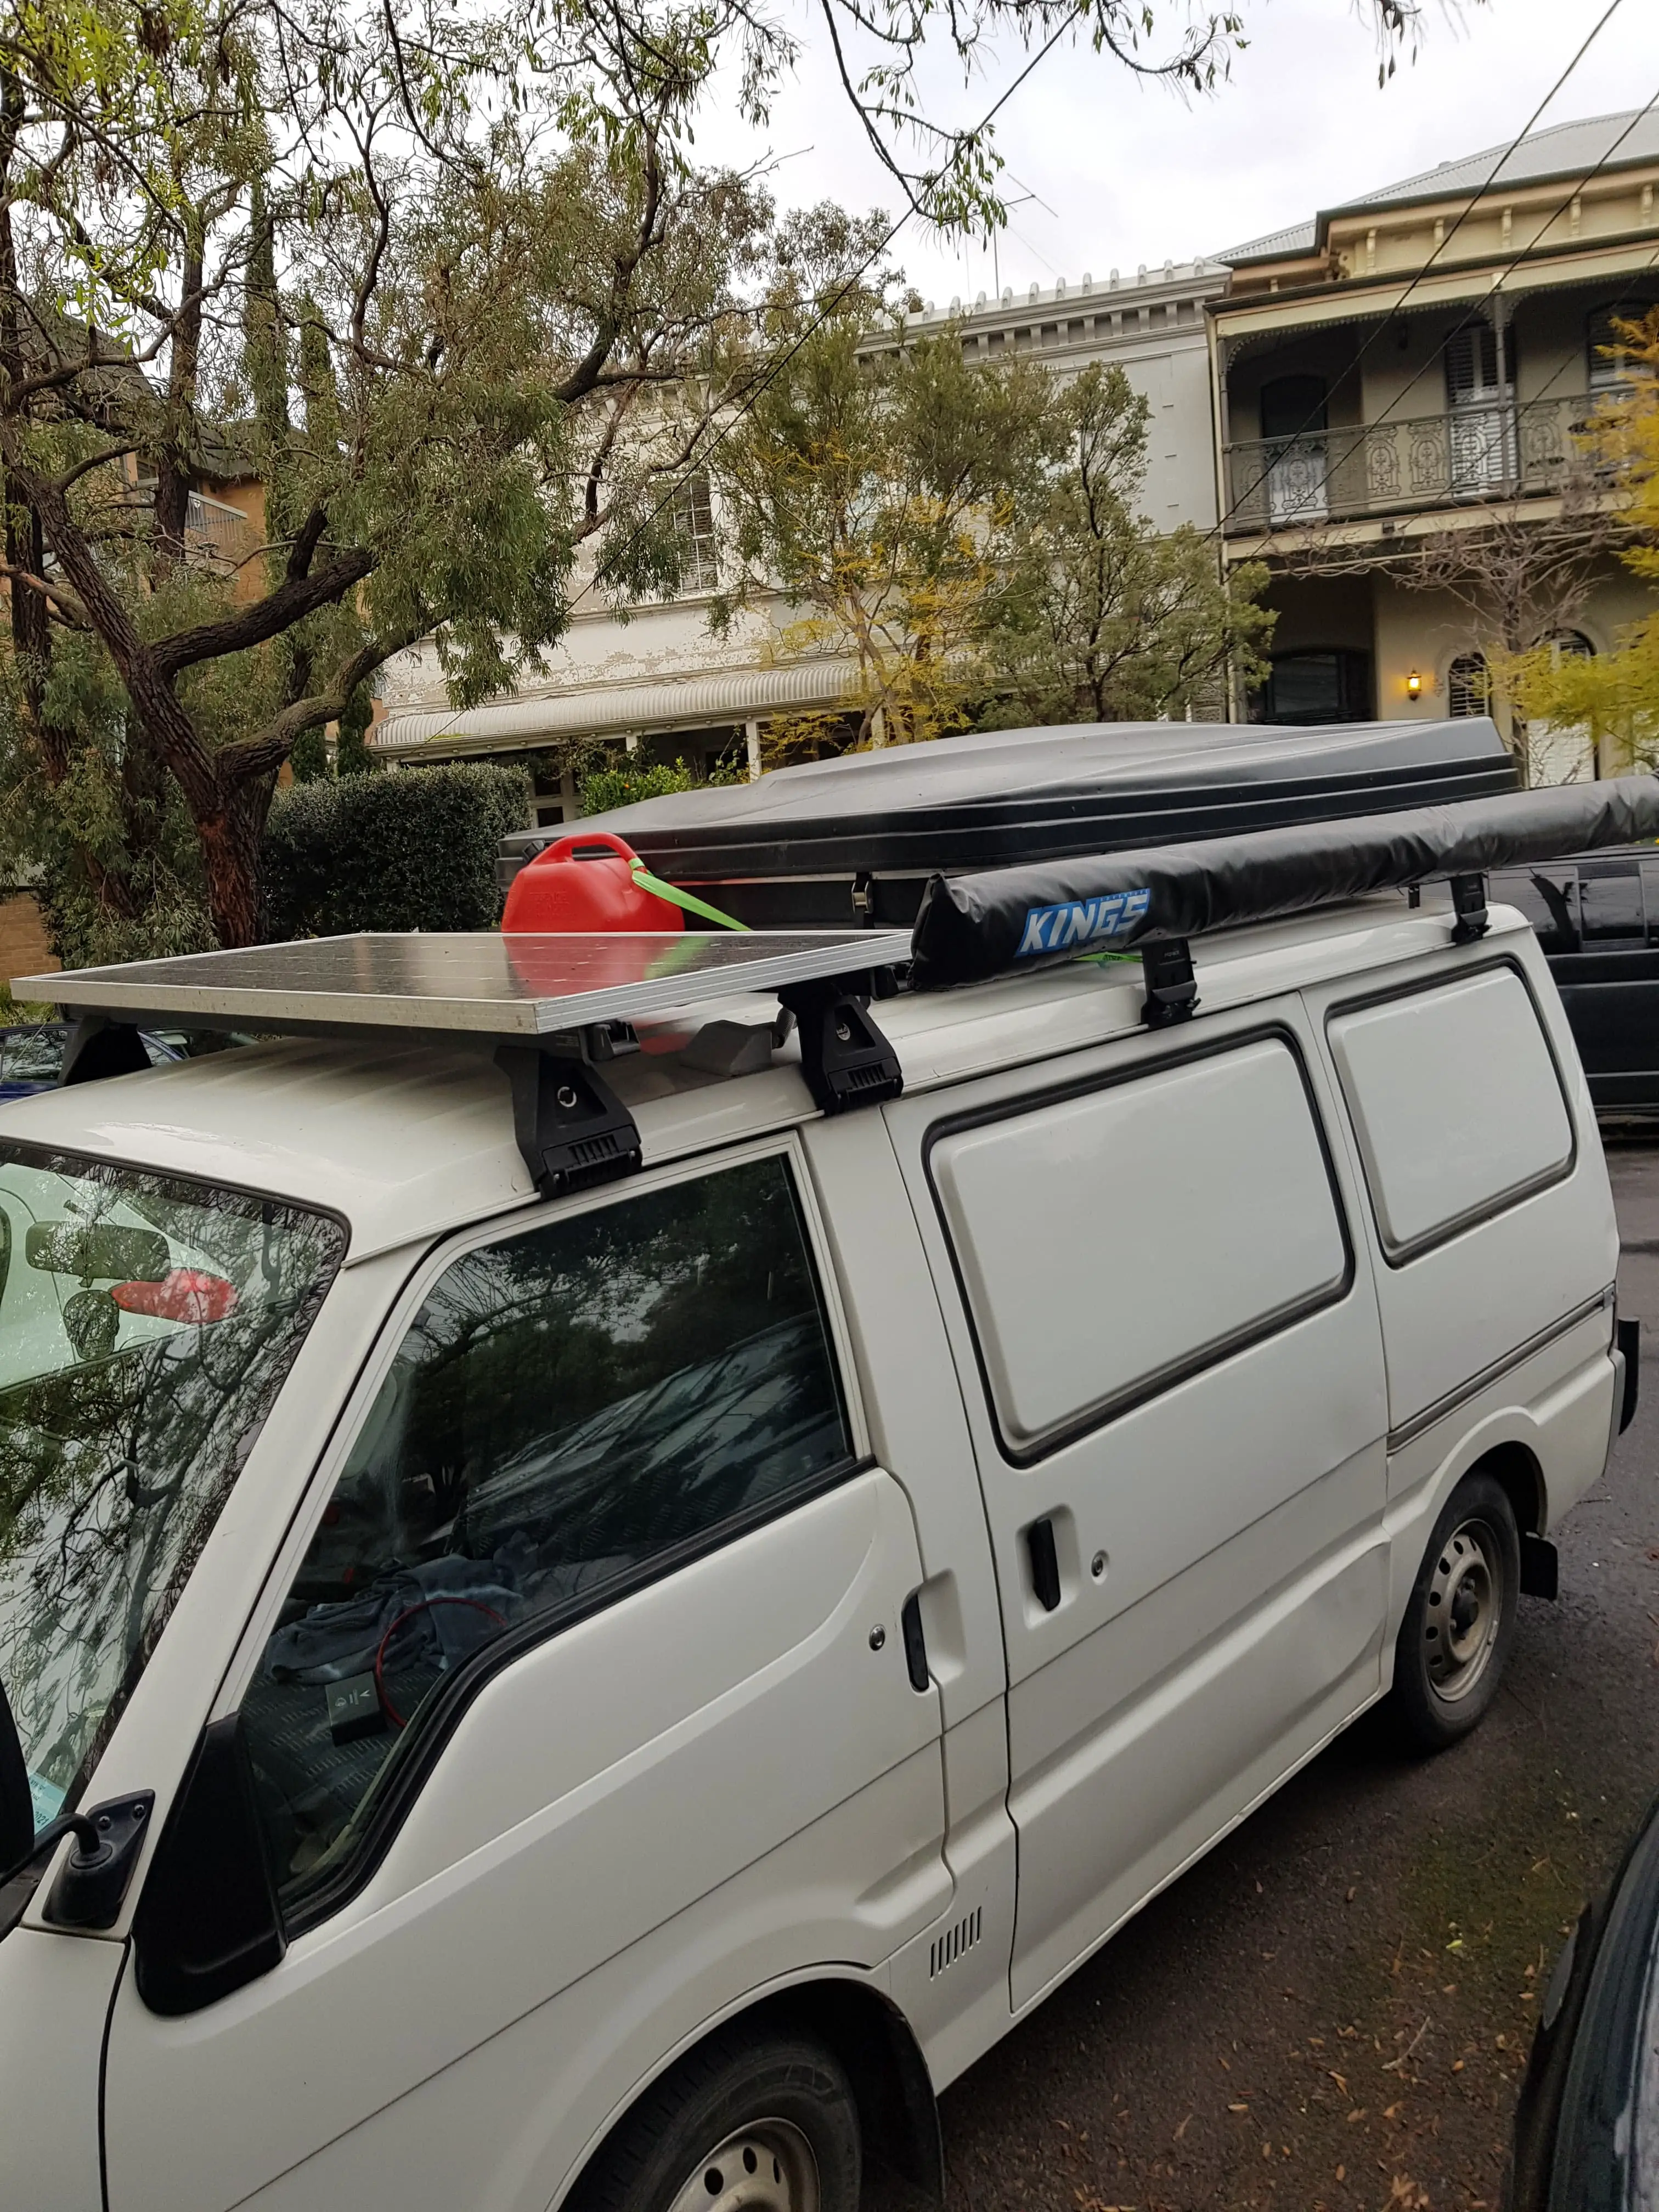 solar panel and petrol on roof of van